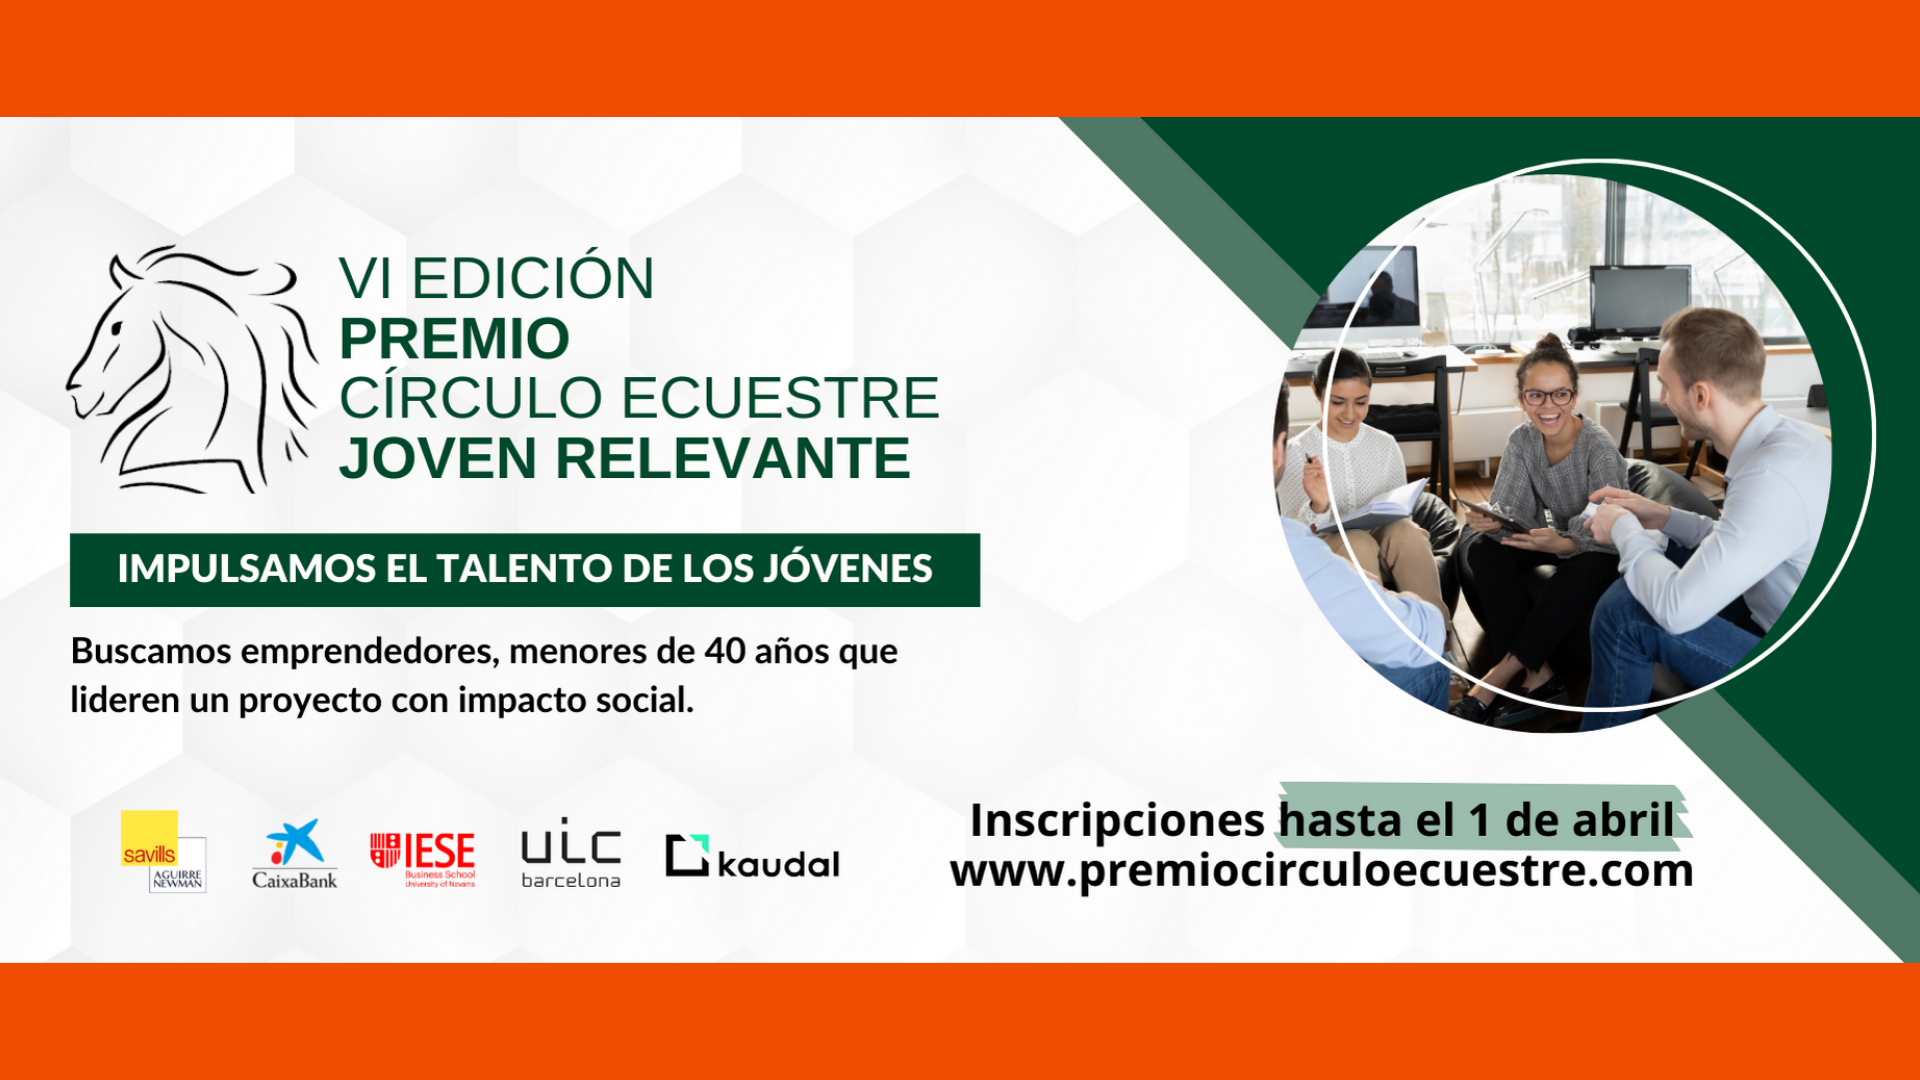 Apply for the Relevant Young Círculo Ecuestre Award - #BHHMembersInitiatives